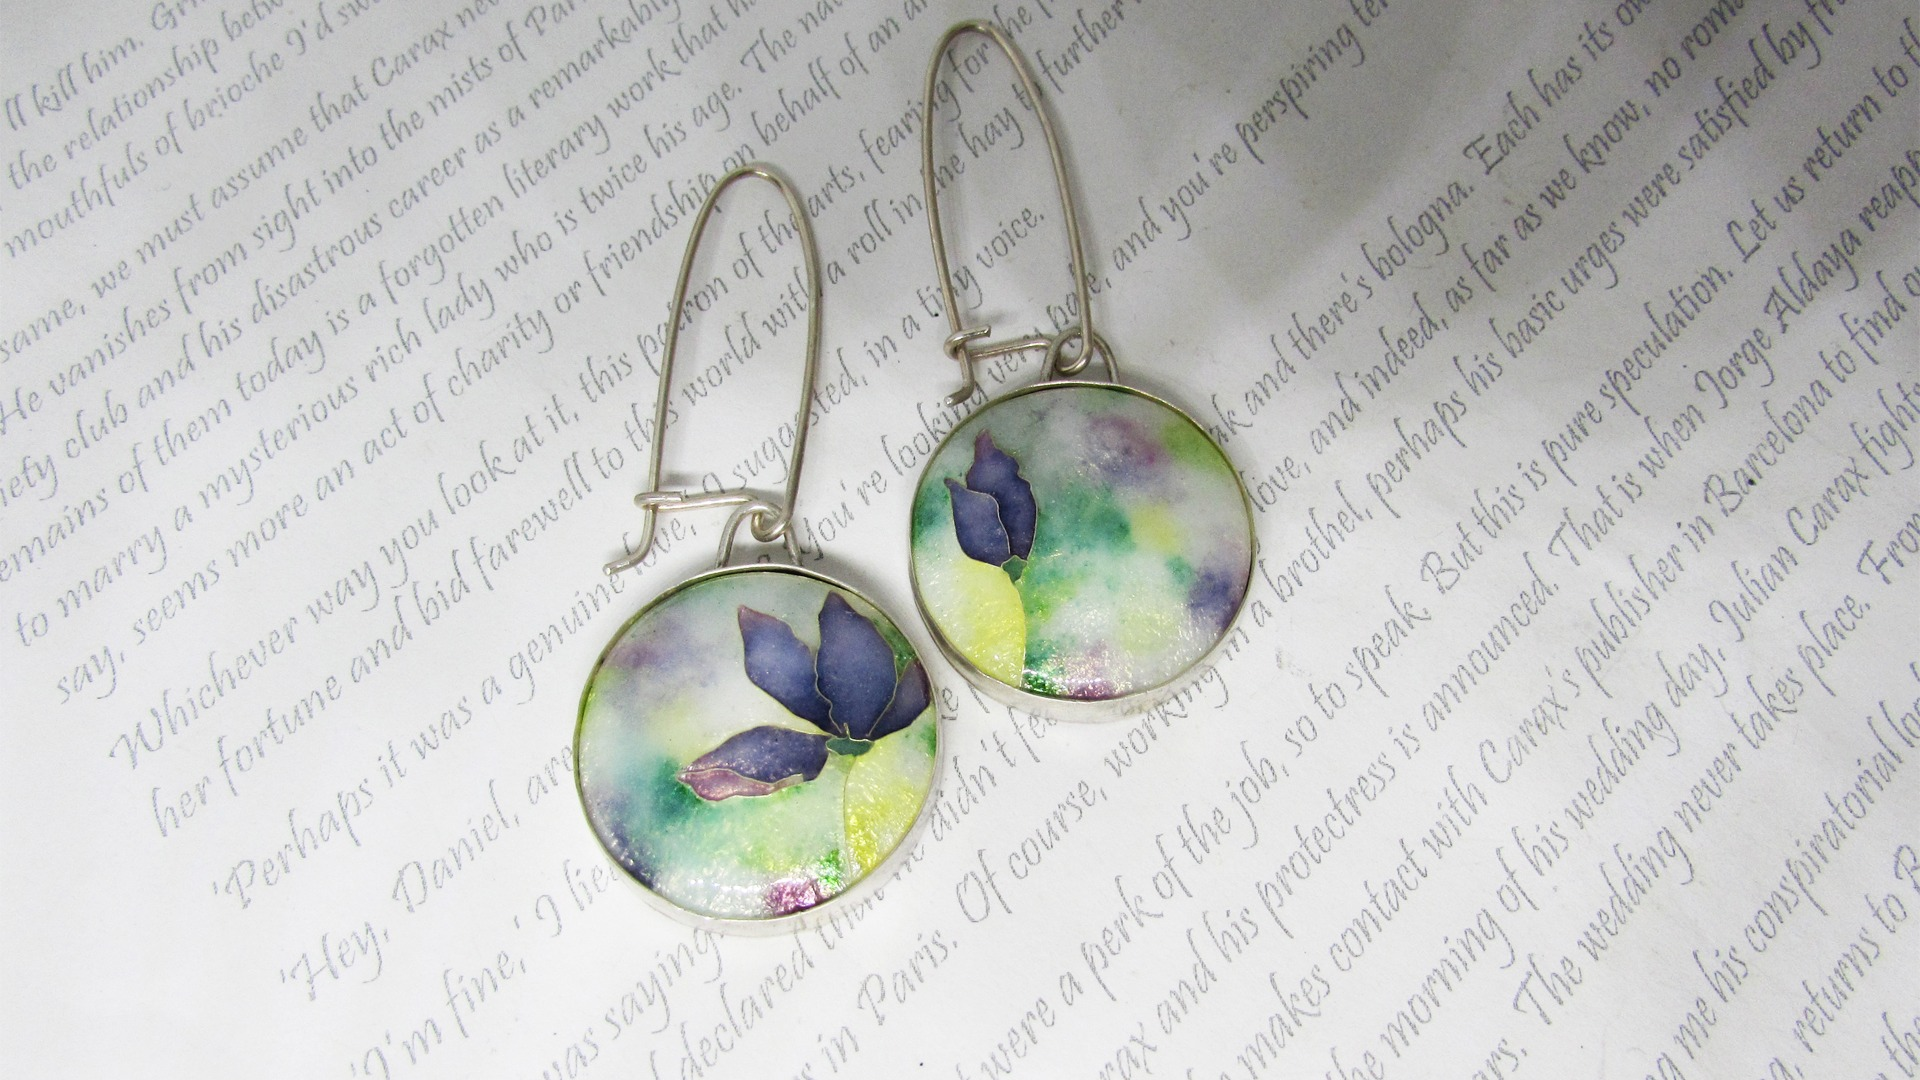 These earrings are made from silver, vitreous enamel and using a technique called cloisonnémade using vitreous enamel and silver. The enamelling technique is called cloisonné